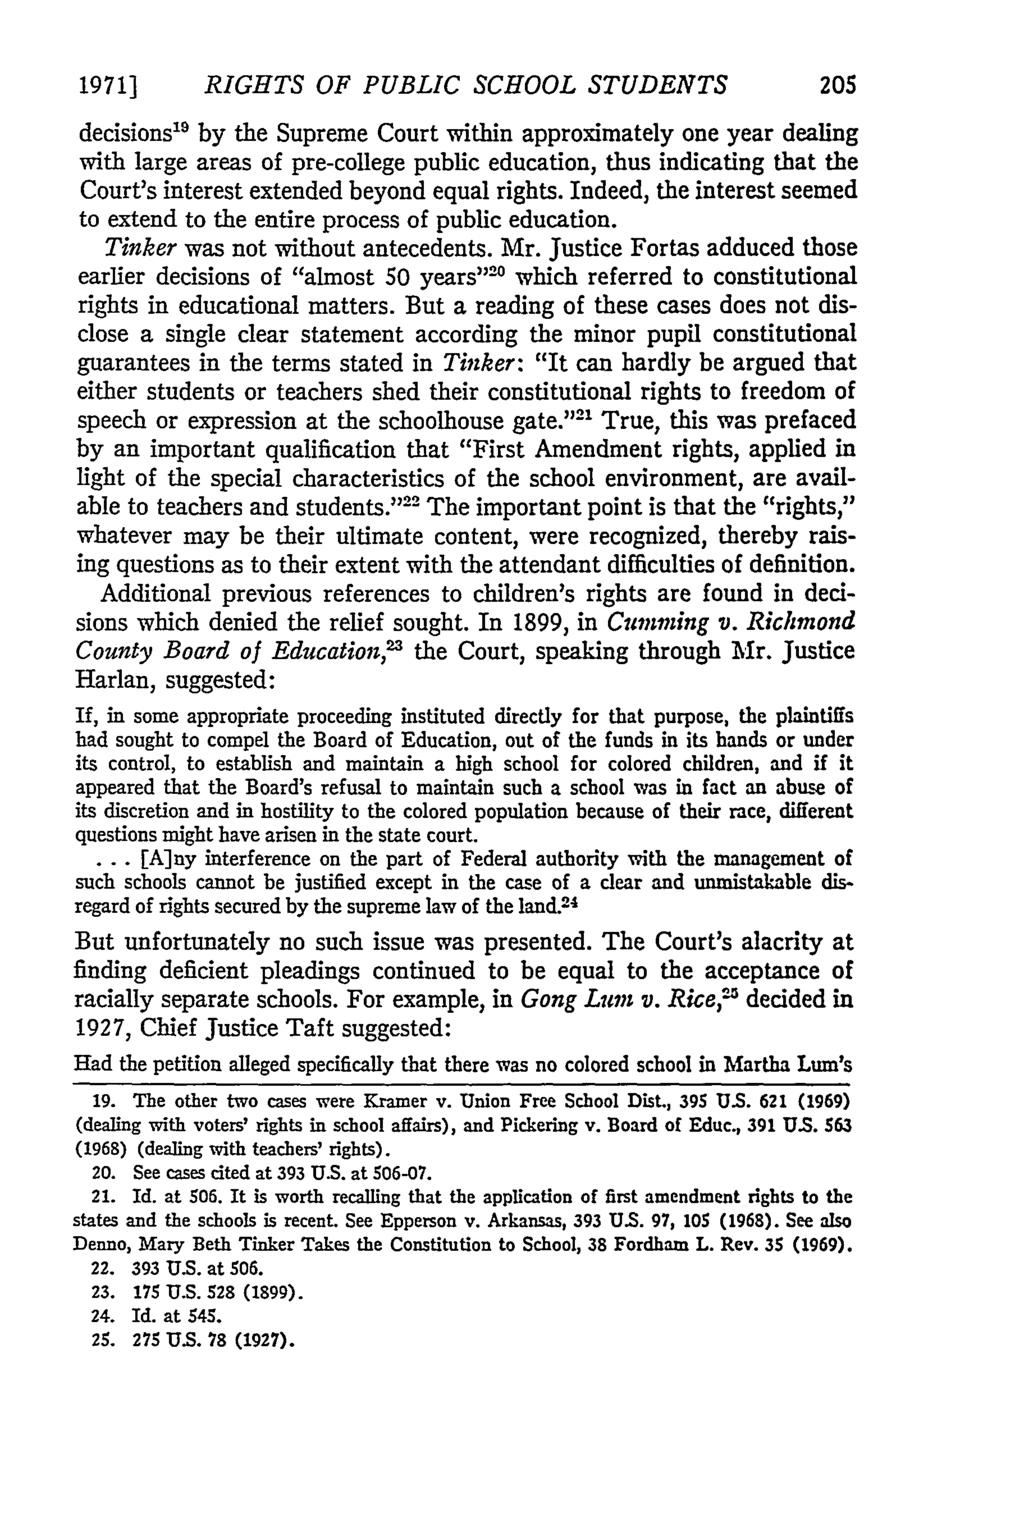 19711 RIGHTS OF PUBLIC SCHOOL STUDENTS decisions 9 by the Supreme Court within approximately one year dealing with large areas of pre-college public education, thus indicating that the Court's